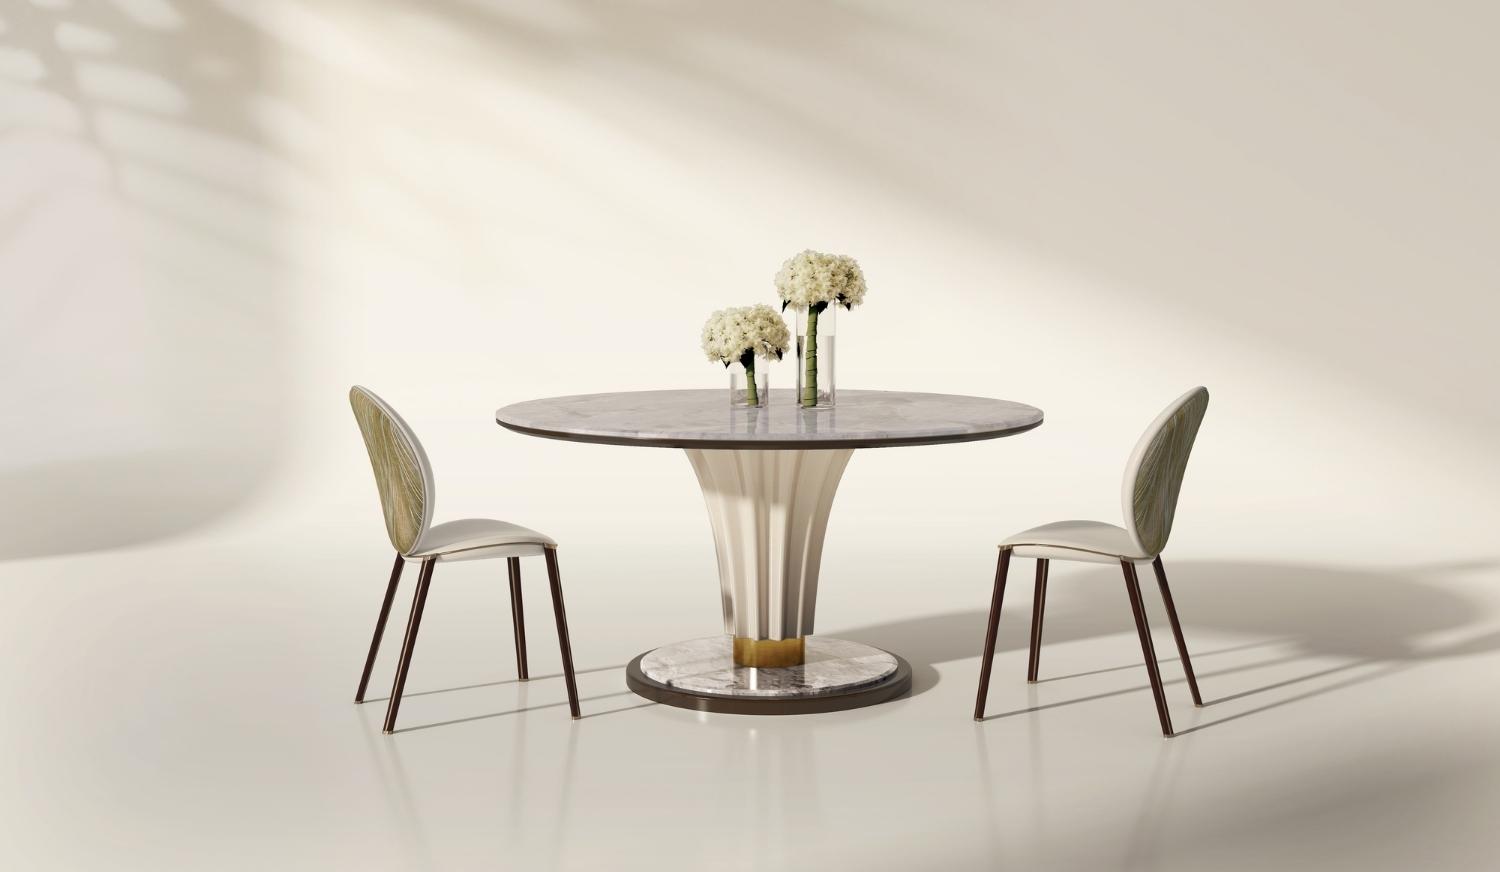 Portica Dining Table Chairs By Marano Furniture 1, Design Authority